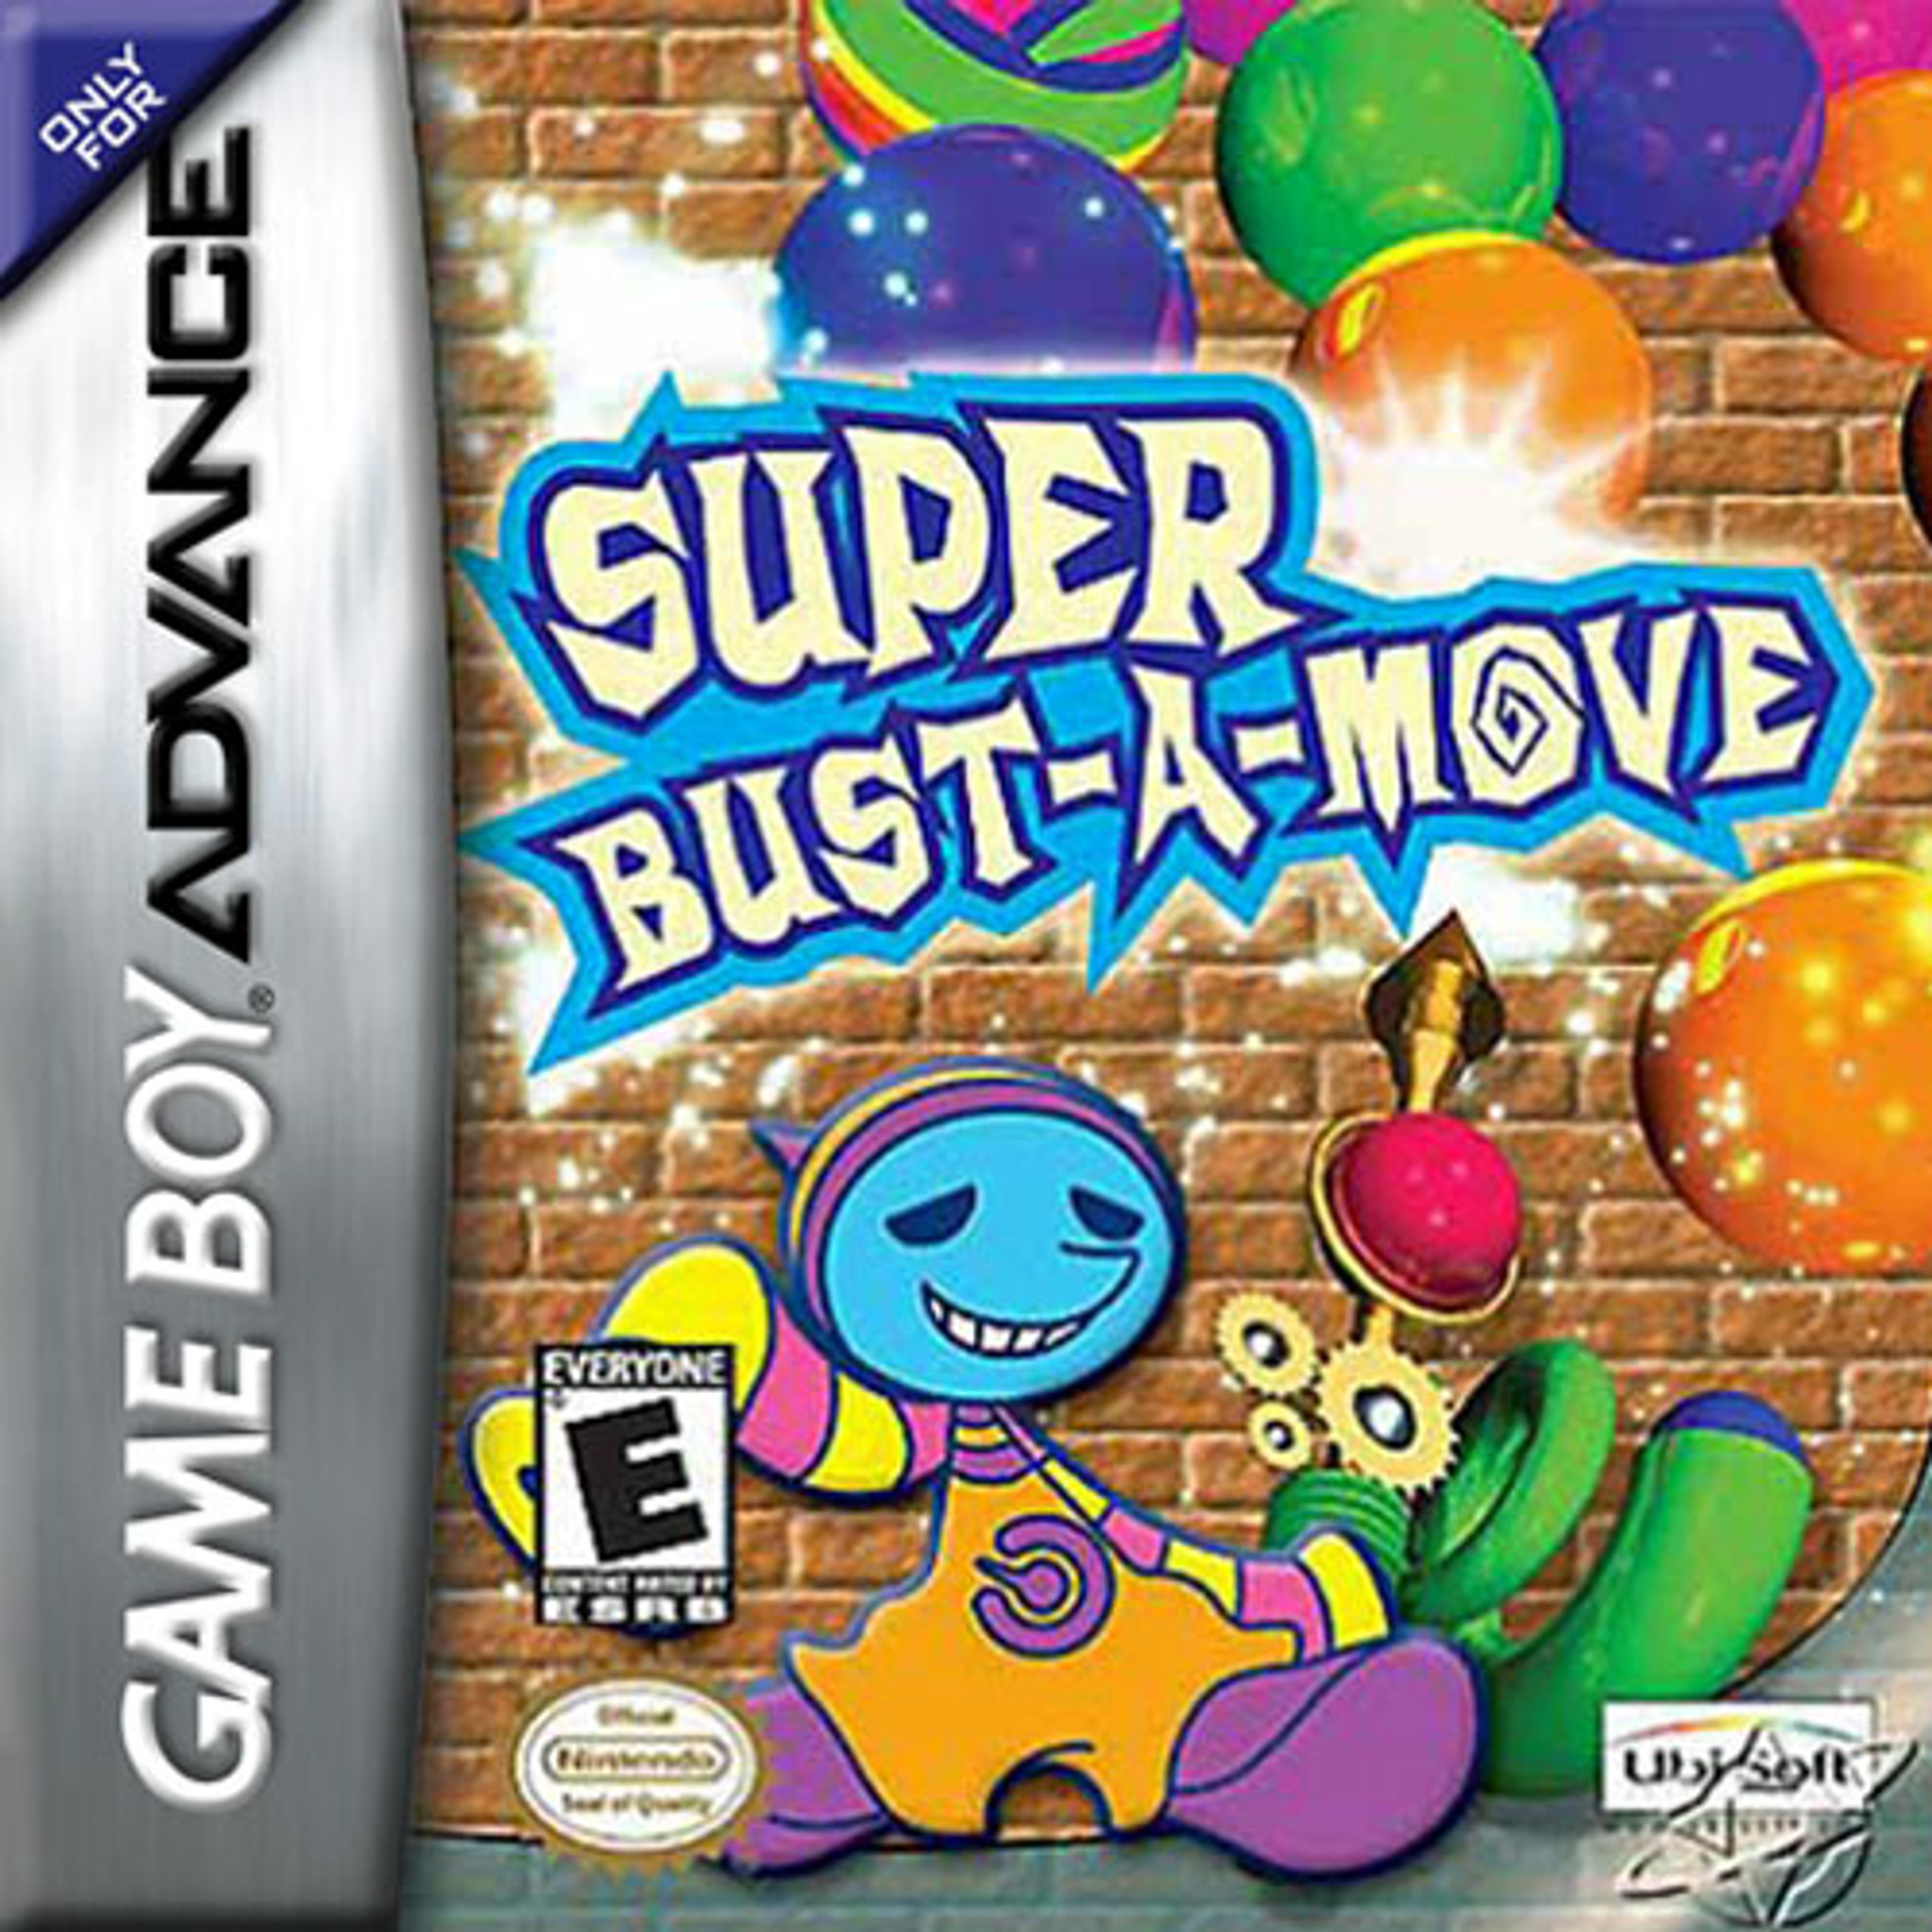 bust a move 4 gameboy ost